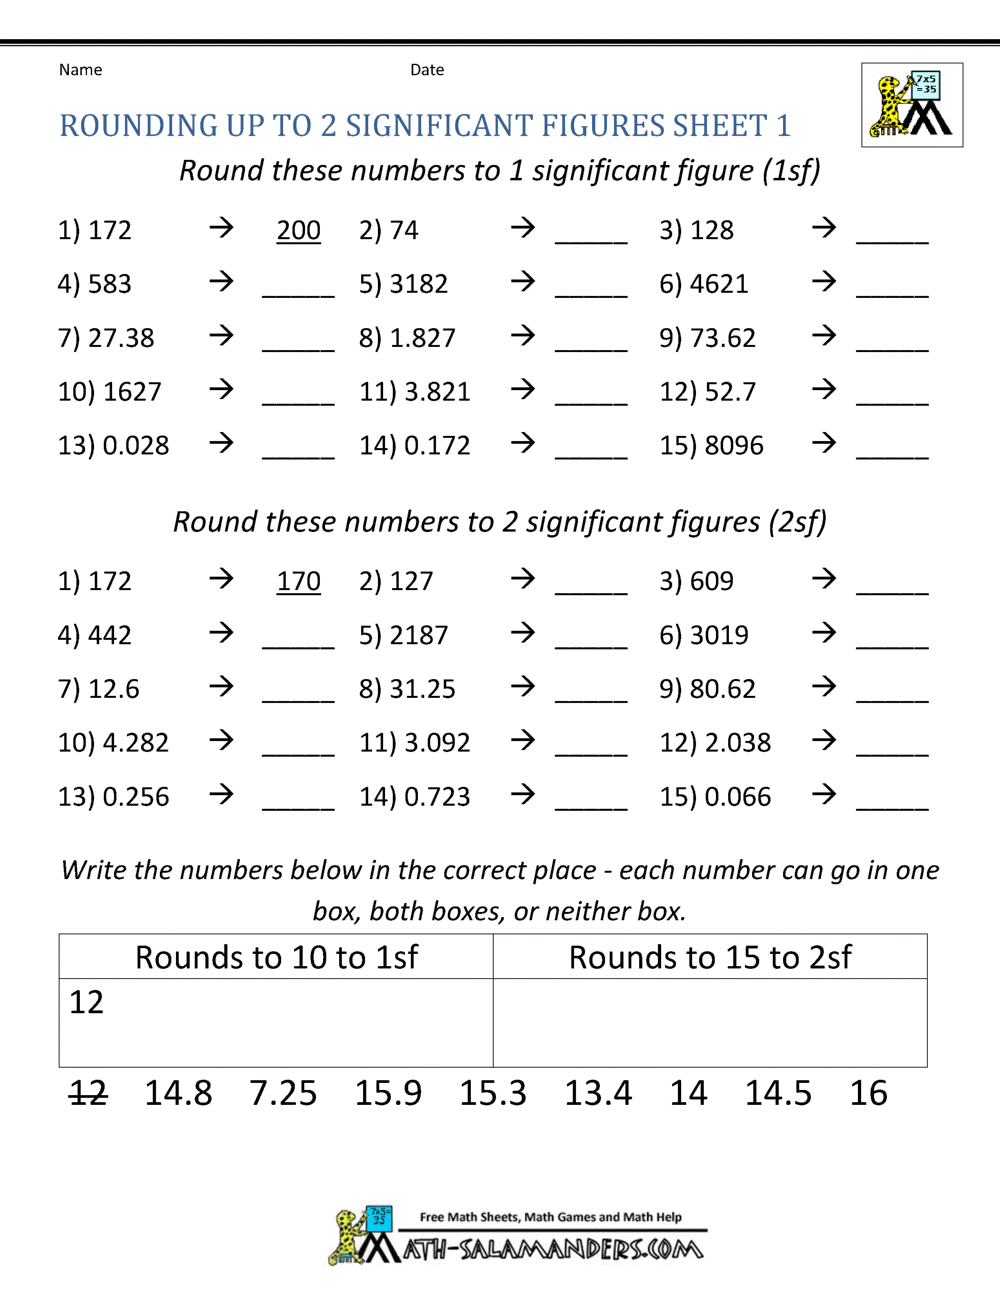 Rounding Significant Figures Inside Significant Figures Worksheet Answers